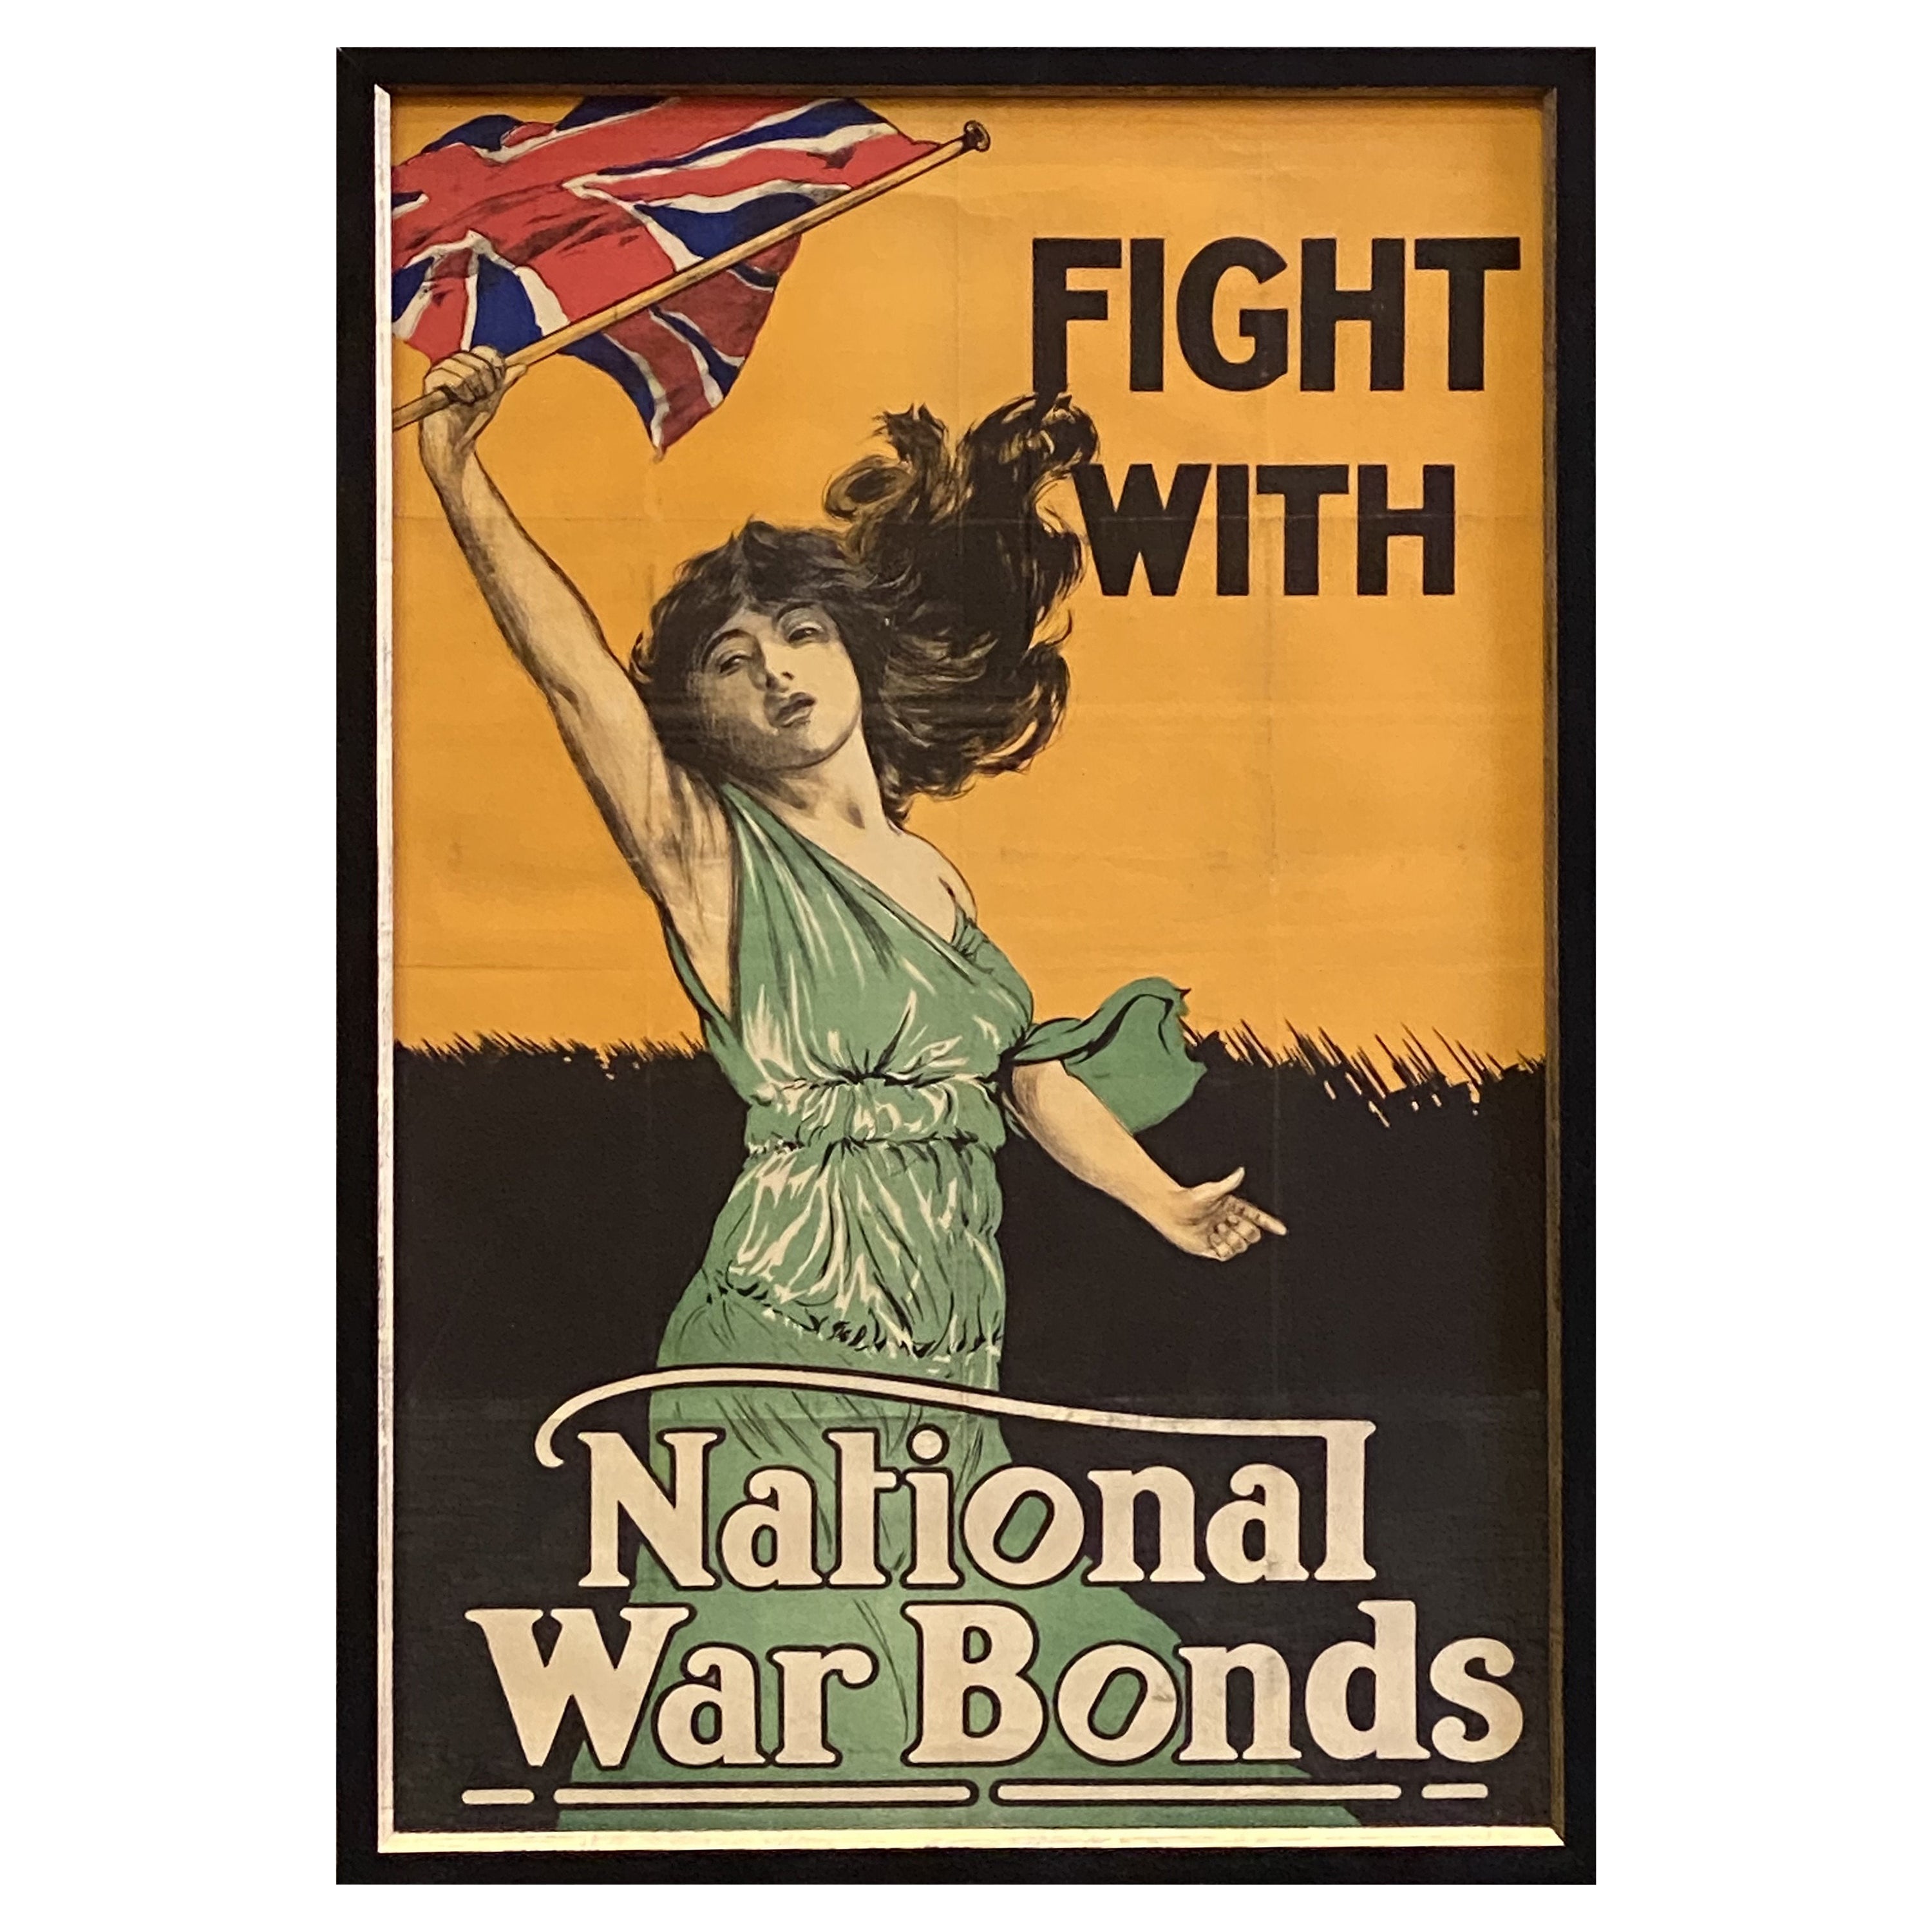 Fight with National War Bonds Vintage British WWI Poster, Circa 1917-18